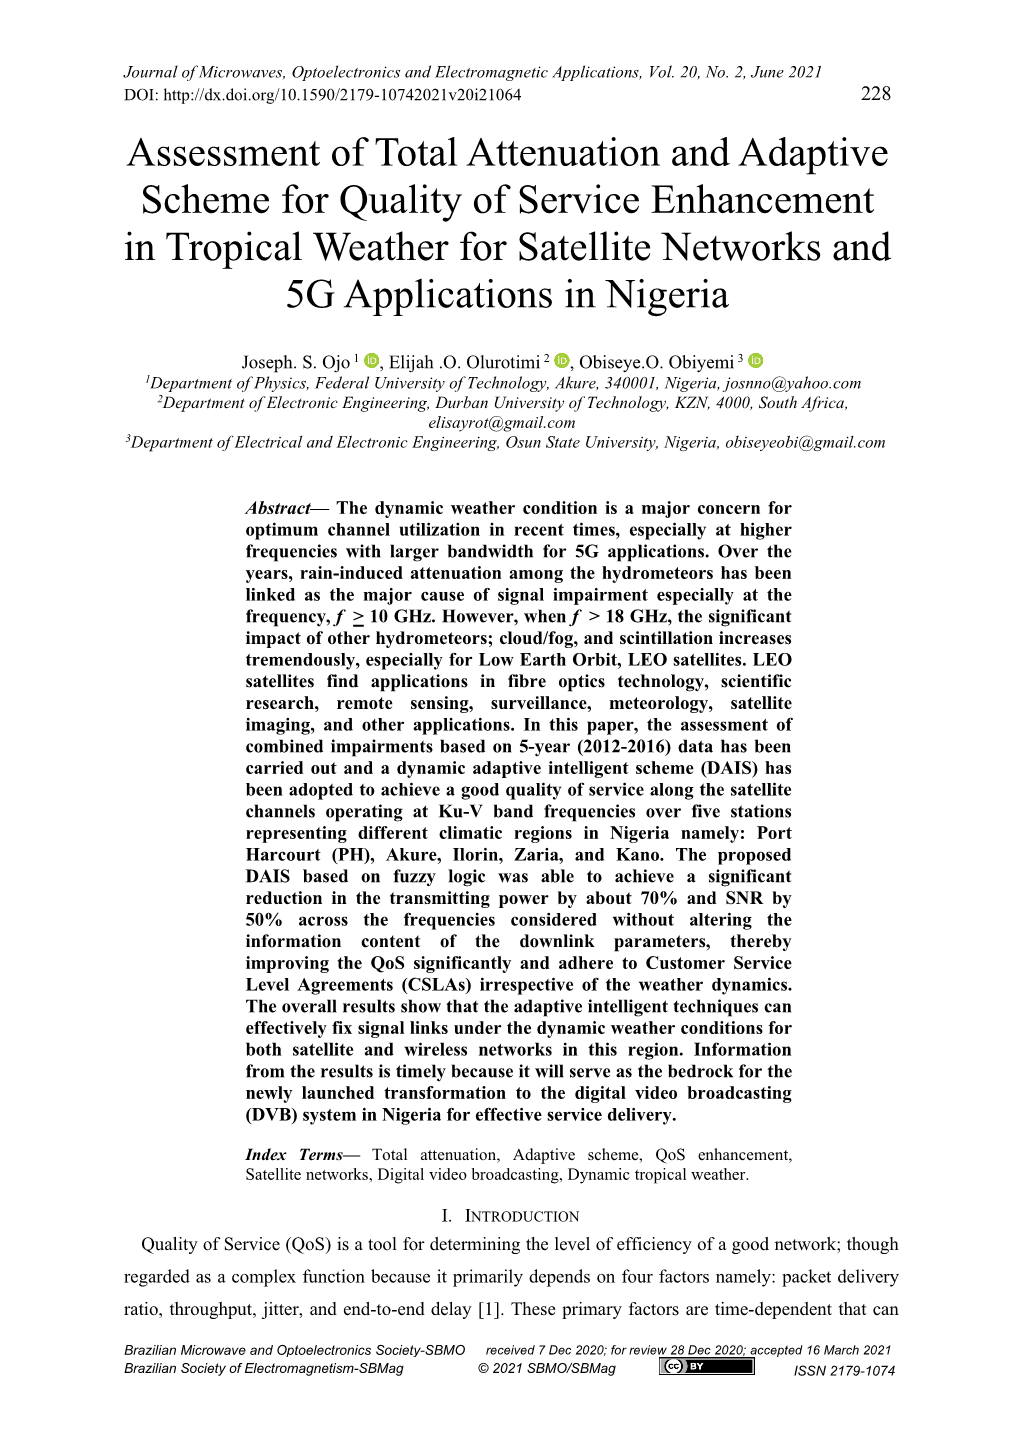 Assessment of Total Attenuation and Adaptive Scheme for Quality of Service Enhancement in Tropical Weather for Satellite Networks and 5G Applications in Nigeria